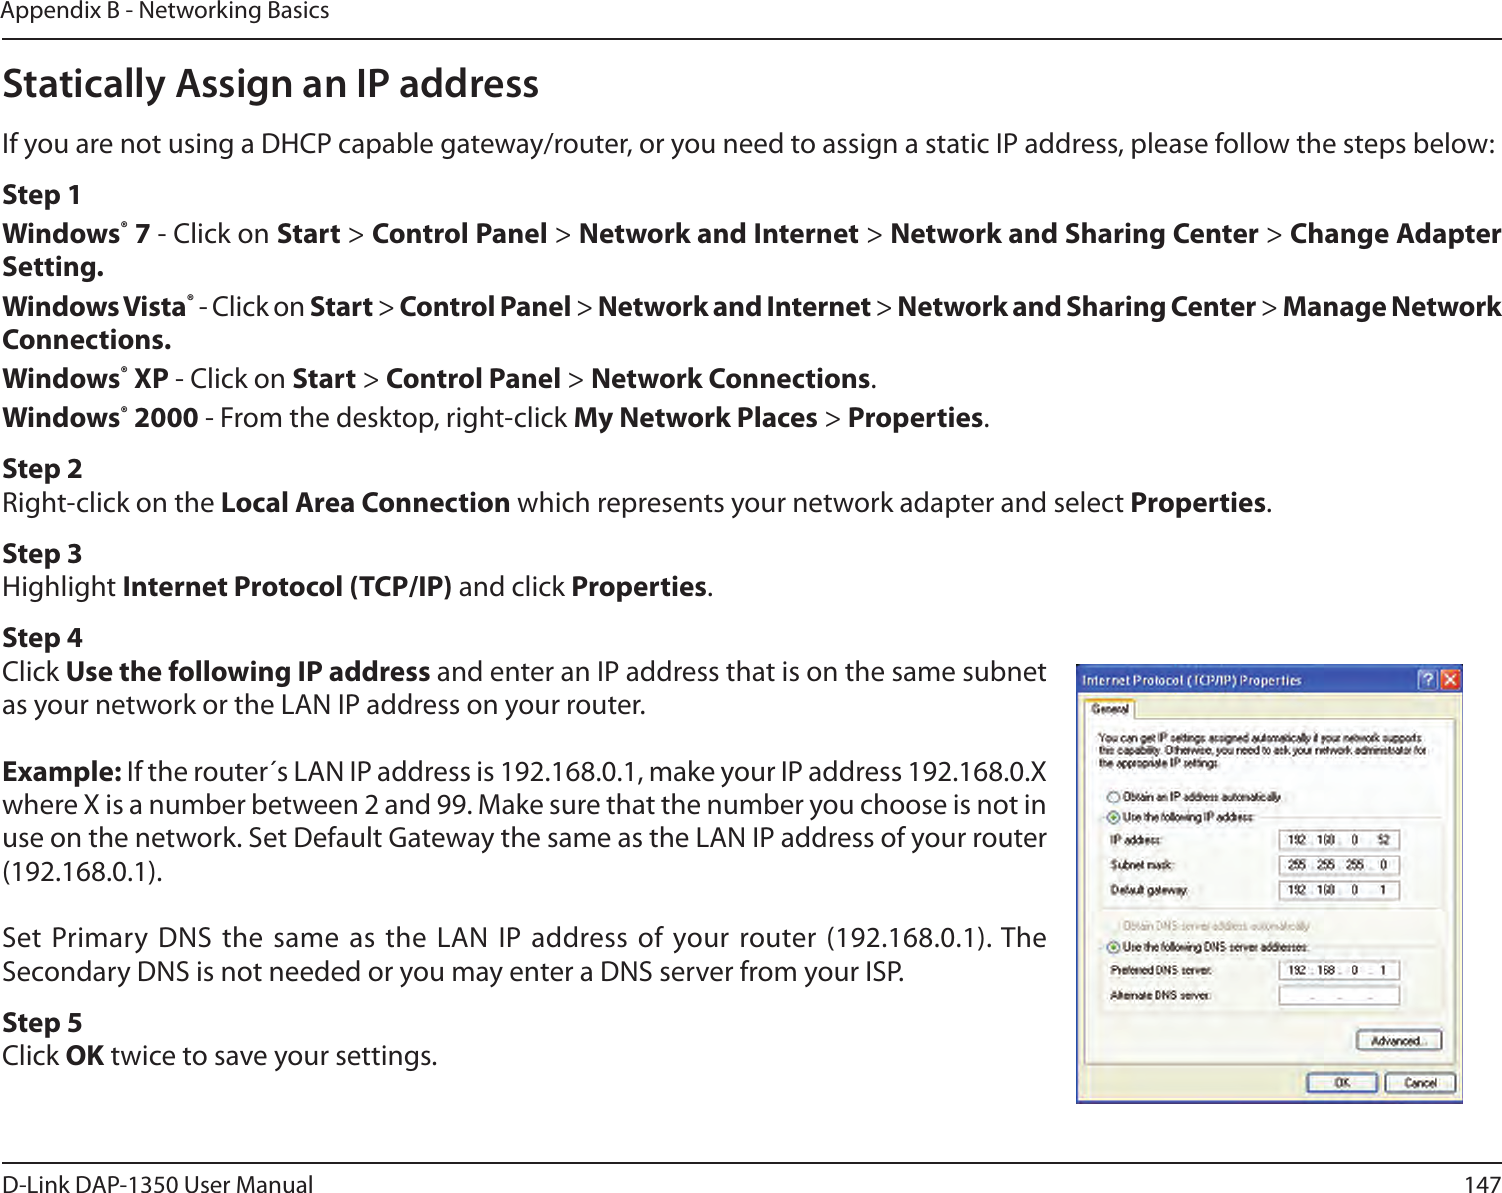 147D-Link DAP-1350 User ManualAppendix B - Networking BasicsStatically Assign an IP addressIf you are not using a DHCP capable gateway/router, or you need to assign a static IP address, please follow the steps below:Step 1Windows® 7 - Click on Start &gt; Control Panel &gt; Network and Internet &gt; Network and Sharing Center &gt; Change Adapter Setting. Windows Vista® - Click on Start &gt; Control Panel &gt; Network and Internet &gt; Network and Sharing Center &gt; Manage Network Connections.Windows® XP - Click on Start &gt; Control Panel &gt; Network Connections.Windows® 2000 - From the desktop, right-click My Network Places &gt; Properties.Step 2Right-click on the Local Area Connection which represents your network adapter and select Properties.Step 3Highlight Internet Protocol (TCP/IP) and click Properties.Step 4Click Use the following IP address and enter an IP address that is on the same subnet as your network or the LAN IP address on your router.Example: If the router´s LAN IP address is 192.168.0.1, make your IP address 192.168.0.X where X is a number between 2 and 99. Make sure that the number you choose is not in use on the network. Set Default Gateway the same as the LAN IP address of your router (192.168.0.1). Set Primary DNS the  same as the  LAN IP address of your router (192.168.0.1). The Secondary DNS is not needed or you may enter a DNS server from your ISP.Step 5Click OK twice to save your settings.